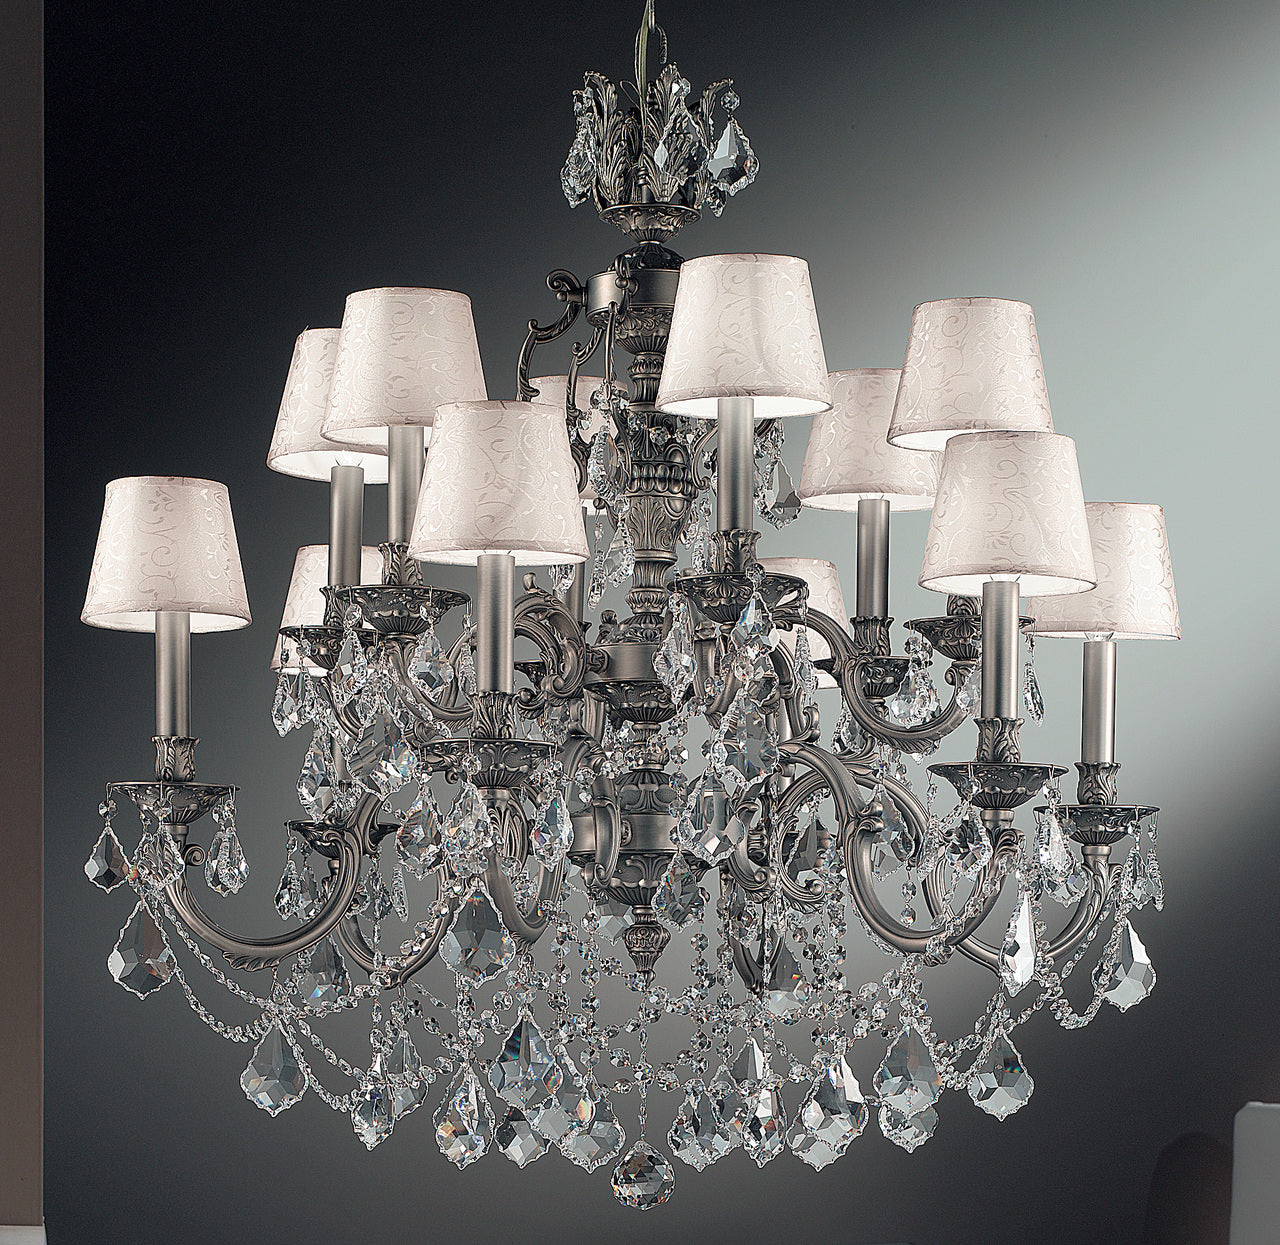 Classic Lighting 57387 FG CGT Chateau Imperial Crystal Chandelier in French Gold (Imported from Spain)